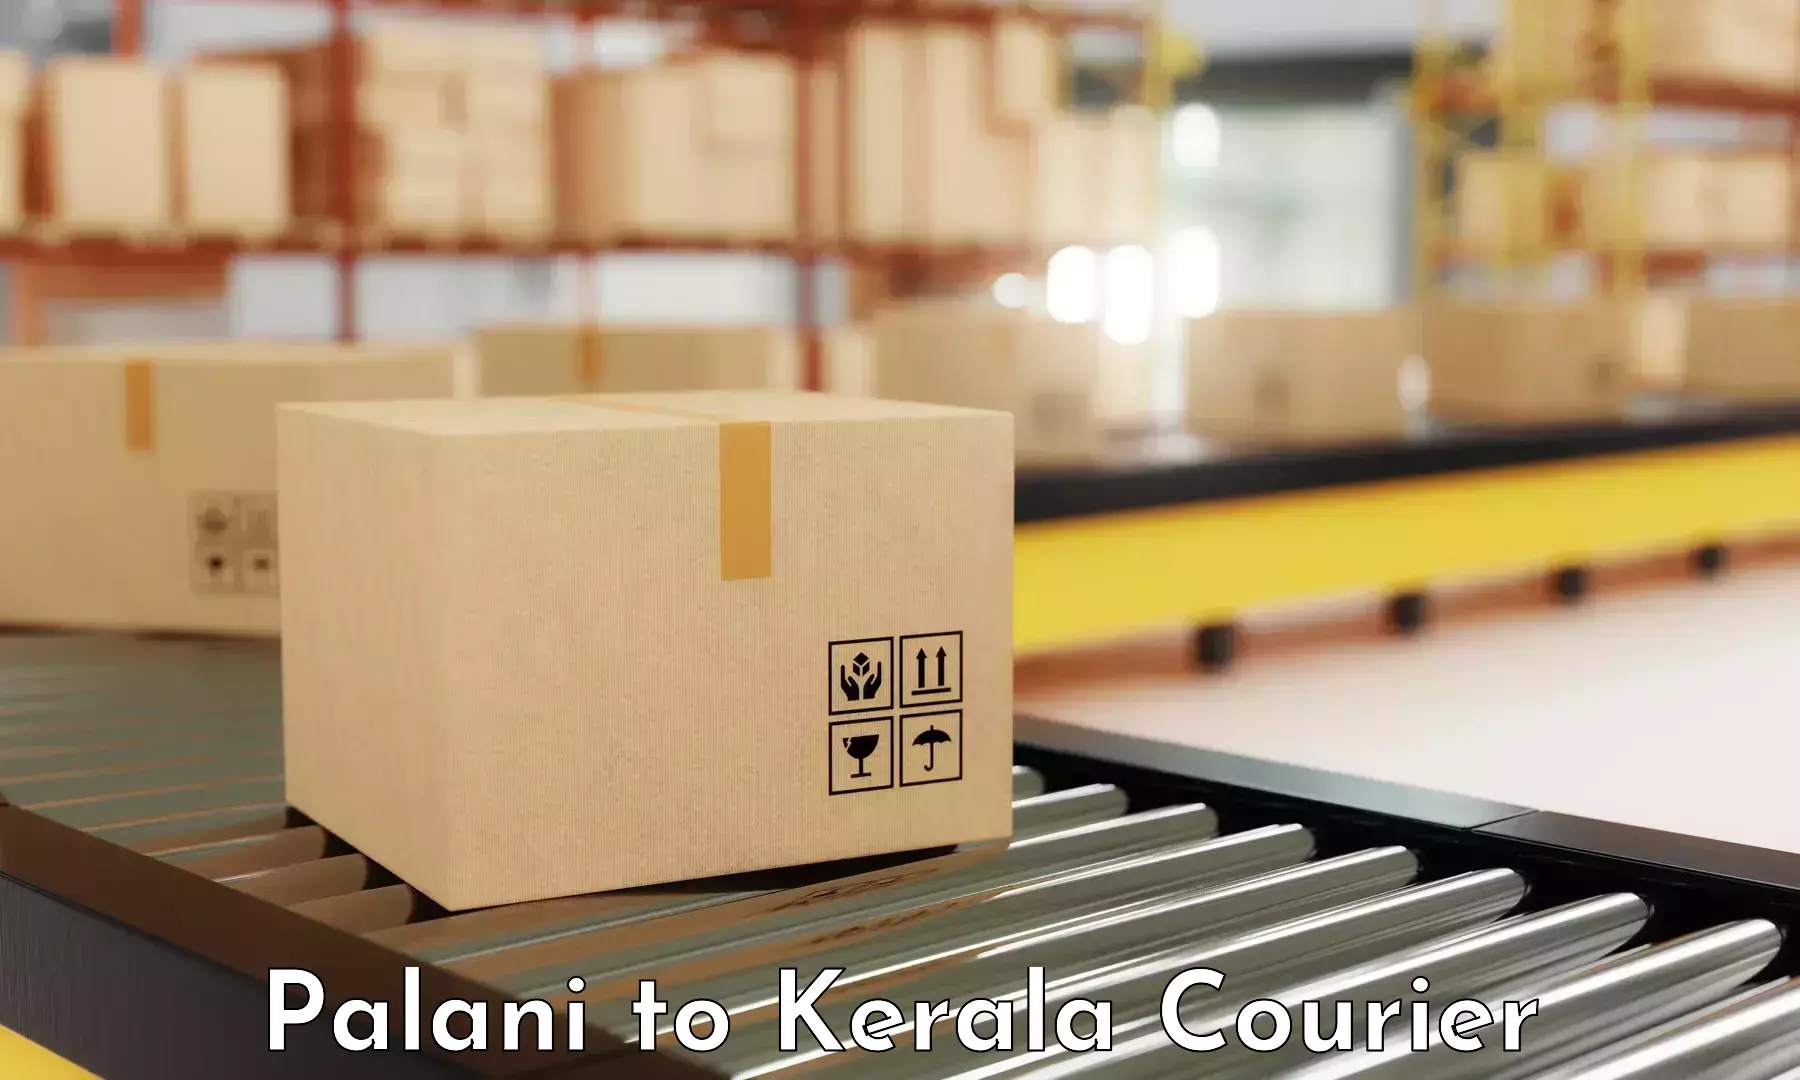 Flexible delivery schedules Palani to Kollam